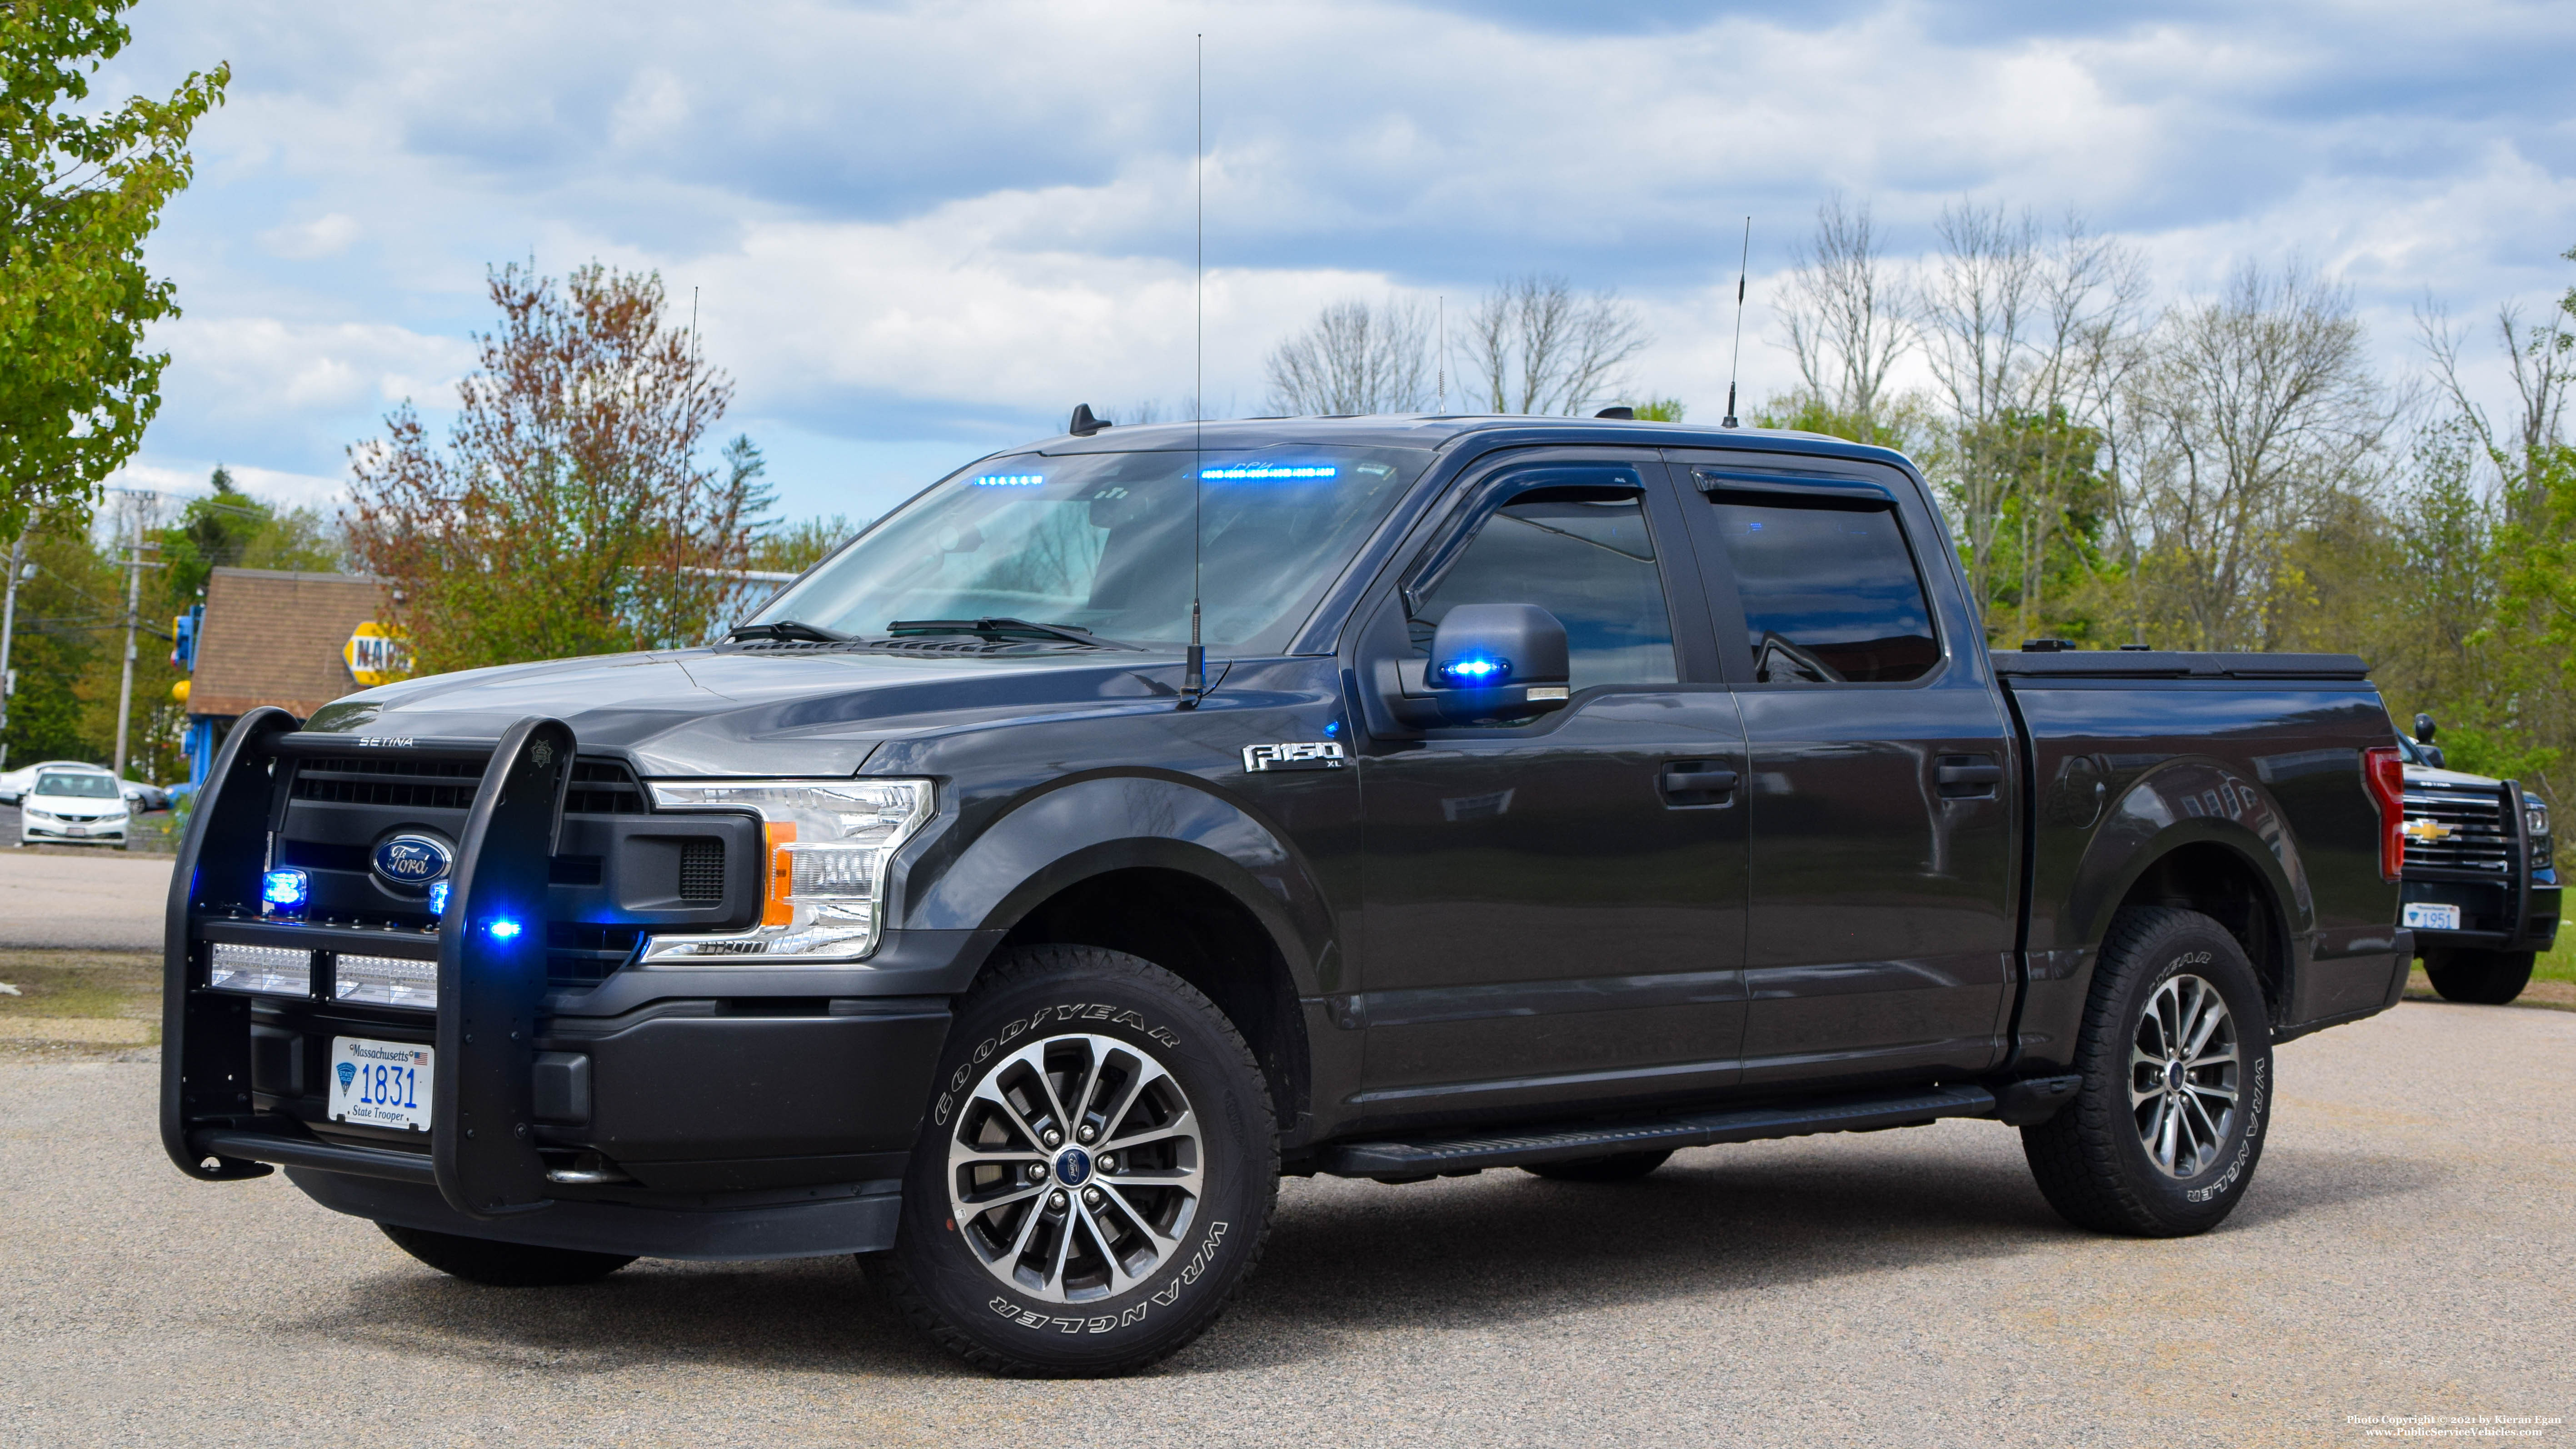 A photo  of Massachusetts State Police
            Cruiser 1831, a 2020 Ford F-150 Police Responder             taken by Kieran Egan